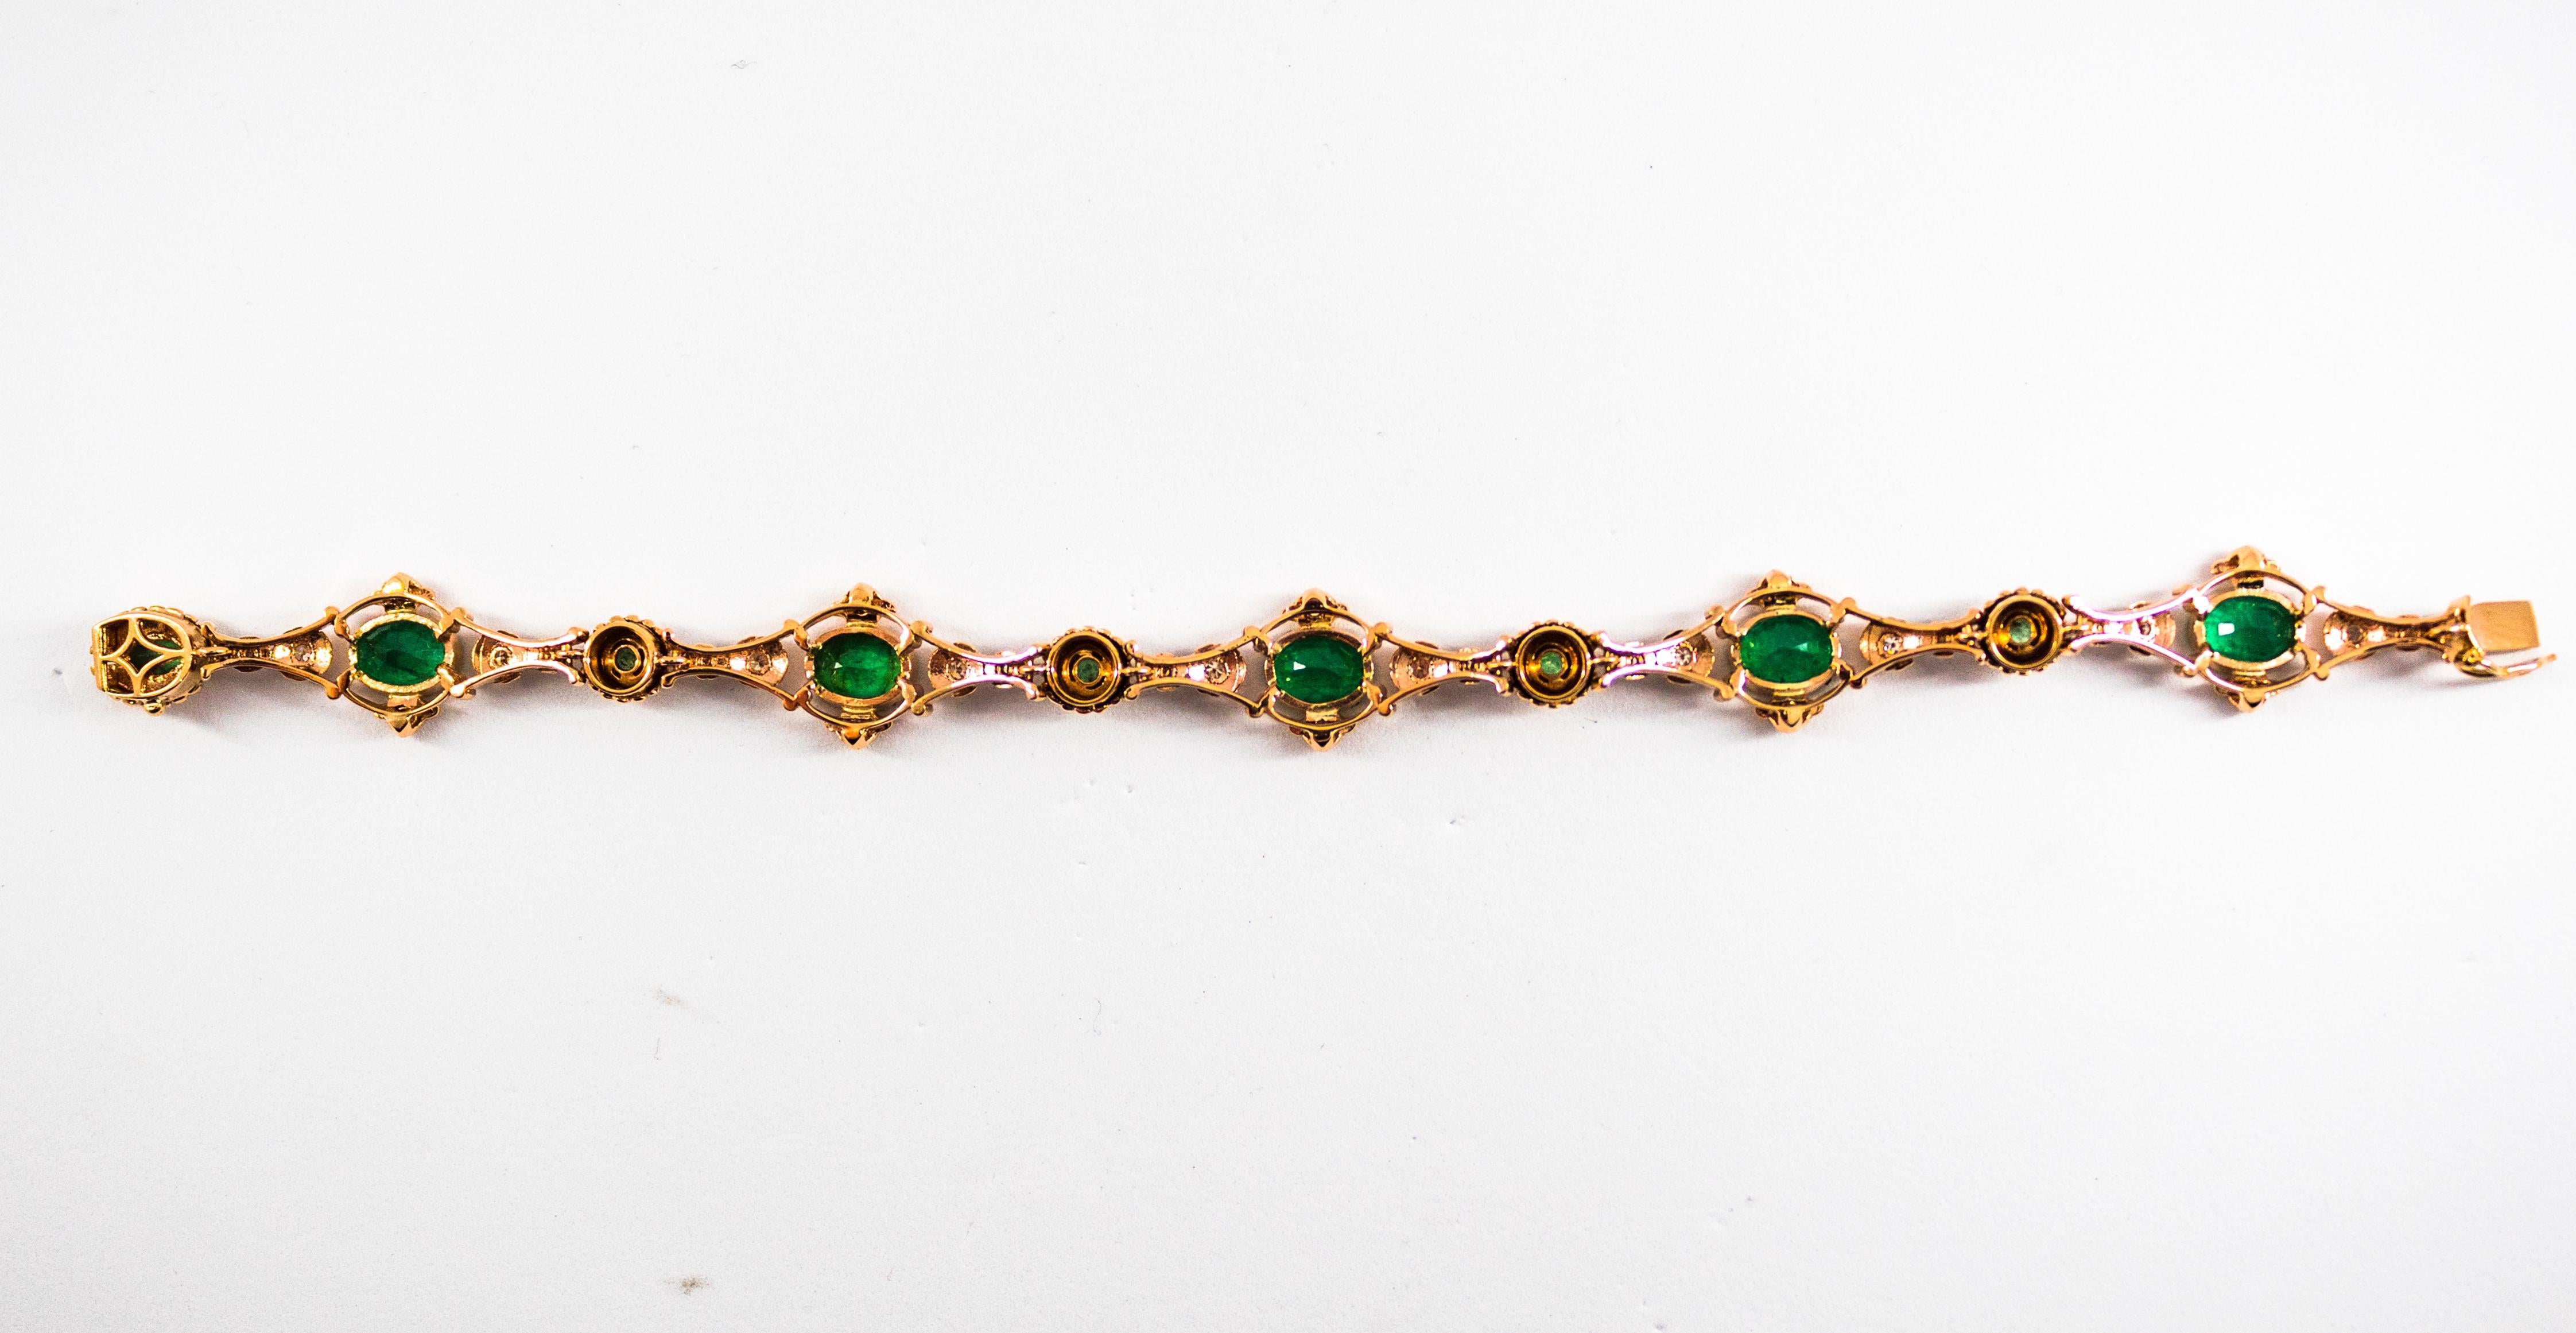 This Bracelet is made of 14K Yellow Gold.
This Bracelet has 0.60 Carats of White Modern Round Cut Diamonds.
This Bracelet has 6.60 Carats of Zambia Natural No Treated Emeralds.
This Bracelet is available also with Opals or Tanzanite.
We're a